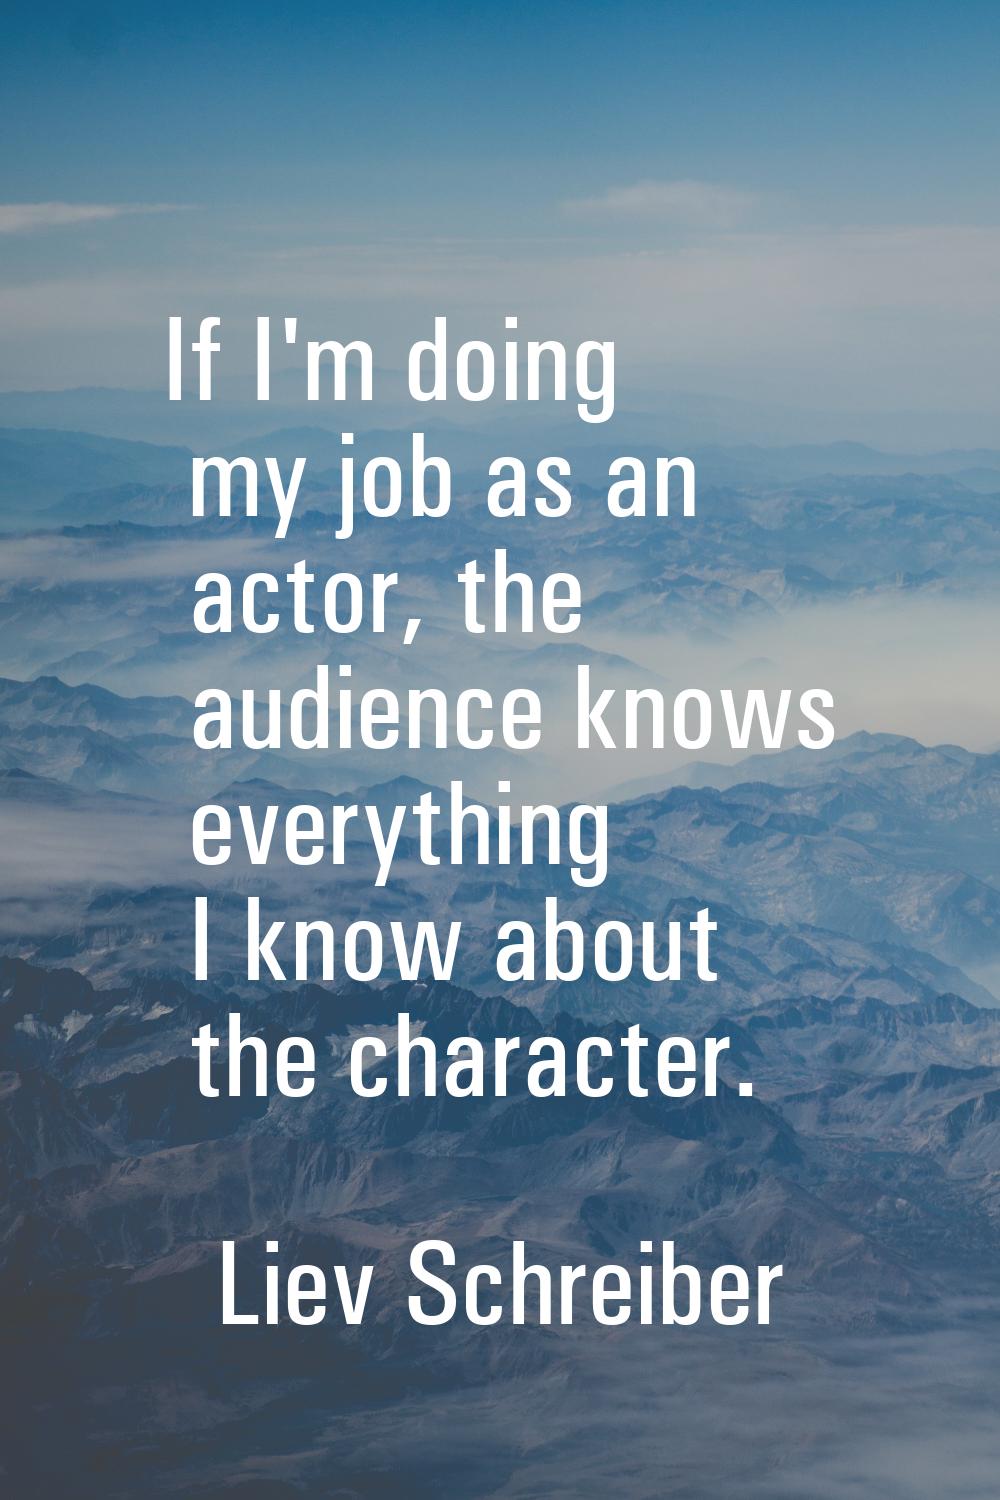 If I'm doing my job as an actor, the audience knows everything I know about the character.